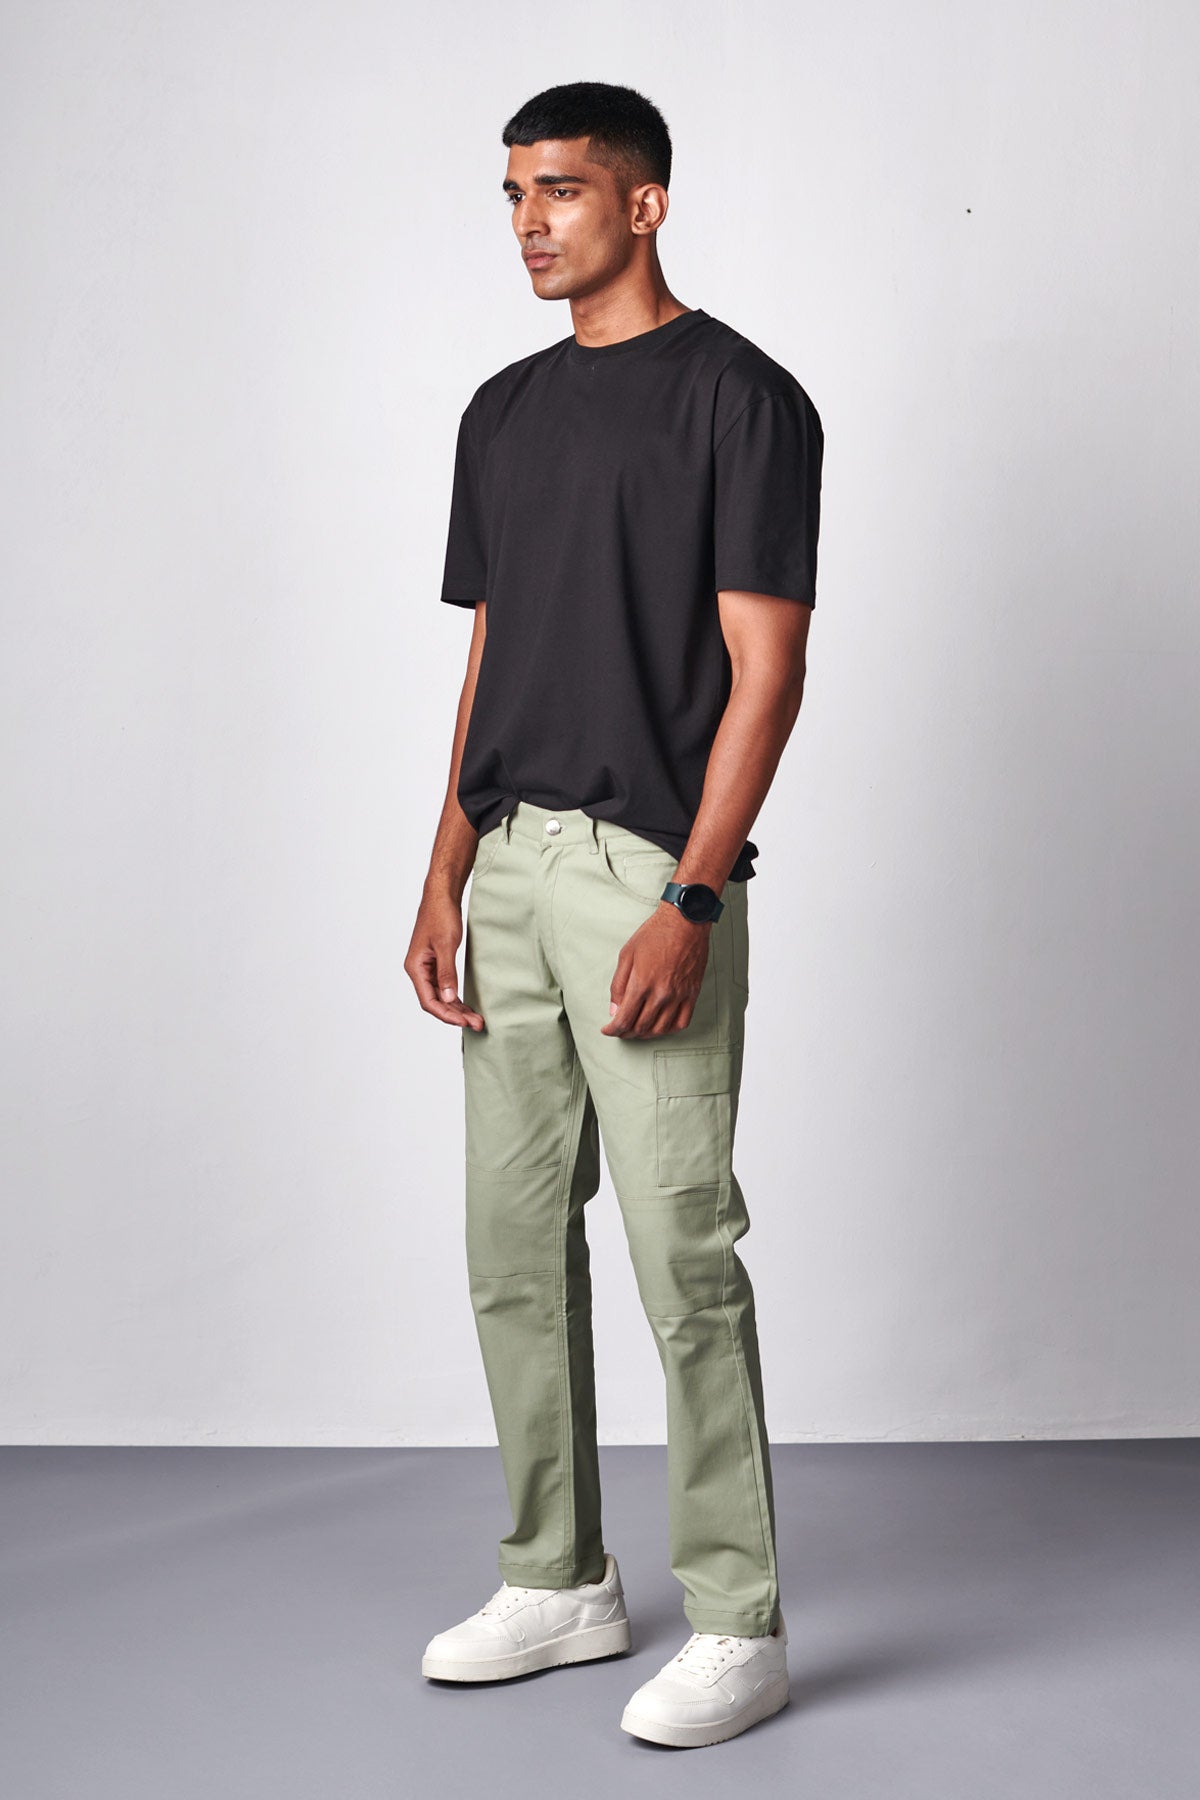 Mens Cargo Pants - Manufacturer Exporter Supplier from Jaipur India